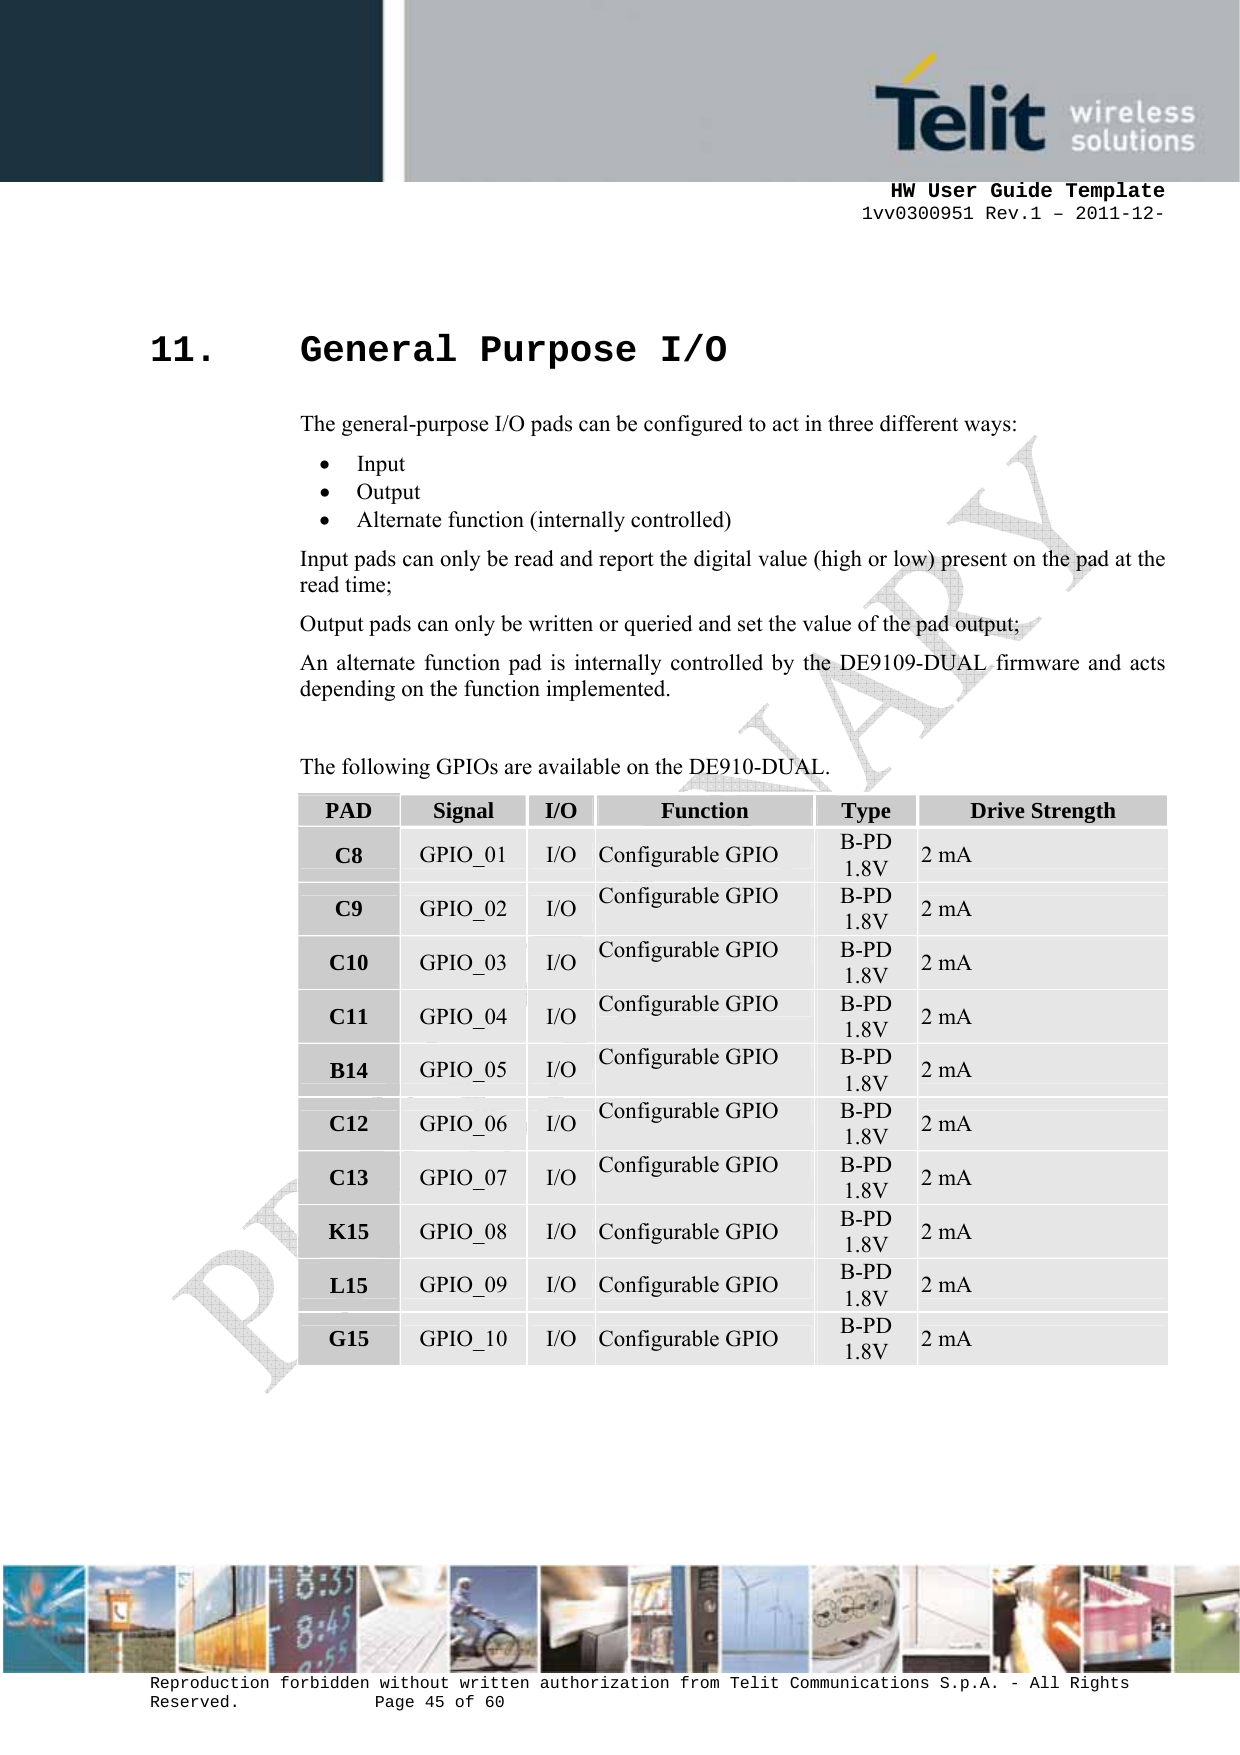      HW User Guide Template 1vv0300951 Rev.1 – 2011-12-  Reproduction forbidden without written authorization from Telit Communications S.p.A. - All Rights Reserved.    Page 45 of 60                                                     11. General Purpose I/O The general-purpose I/O pads can be configured to act in three different ways: • Input • Output • Alternate function (internally controlled) Input pads can only be read and report the digital value (high or low) present on the pad at the read time;  Output pads can only be written or queried and set the value of the pad output;  An alternate function pad is internally controlled by the DE9109-DUAL firmware and acts depending on the function implemented.  The following GPIOs are available on the DE910-DUAL. PAD  Signal  I/O Function  Type  Drive Strength C8  GPIO_01  I/O Configurable GPIO  B-PD 1.8V  2 mA C9  GPIO_02  I/O Configurable GPIO  B-PD 1.8V  2 mA C10  GPIO_03  I/O Configurable GPIO  B-PD 1.8V  2 mA C11  GPIO_04  I/O Configurable GPIO  B-PD 1.8V  2 mA B14  GPIO_05  I/O Configurable GPIO  B-PD 1.8V  2 mA C12  GPIO_06  I/O Configurable GPIO  B-PD 1.8V  2 mA C13  GPIO_07  I/O Configurable GPIO  B-PD 1.8V  2 mA K15  GPIO_08  I/O Configurable GPIO  B-PD 1.8V  2 mA L15  GPIO_09  I/O Configurable GPIO  B-PD 1.8V  2 mA G15  GPIO_10  I/O Configurable GPIO  B-PD 1.8V  2 mA   